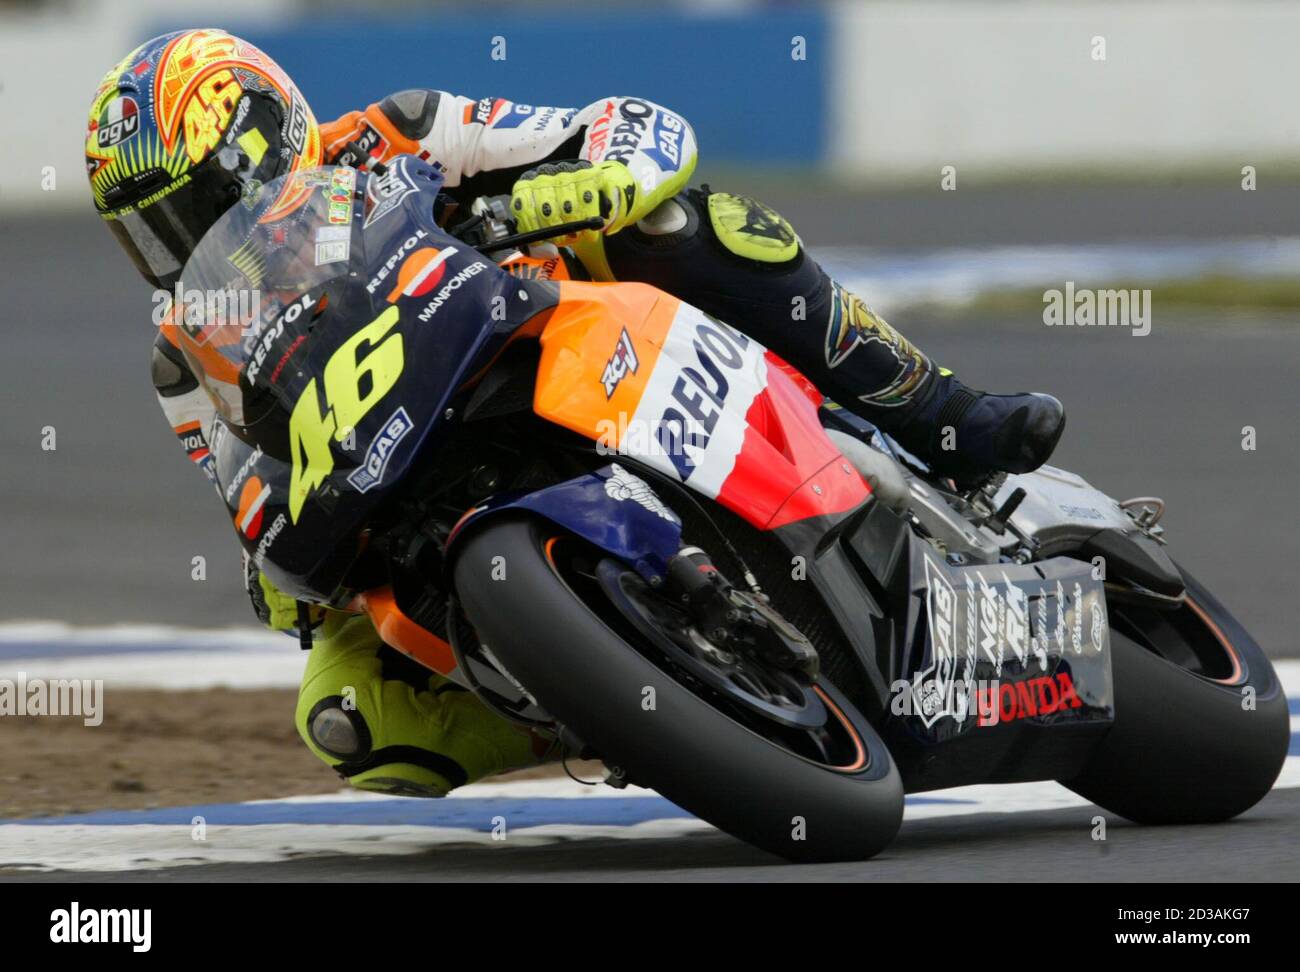 Italy's Valentino Rossi leans his Honda through a chicane of the Donington  Park circuit during the qualifying for the British motorcycling Grand Prix  at Donington Park circuit July 13, 2002. Rossi took